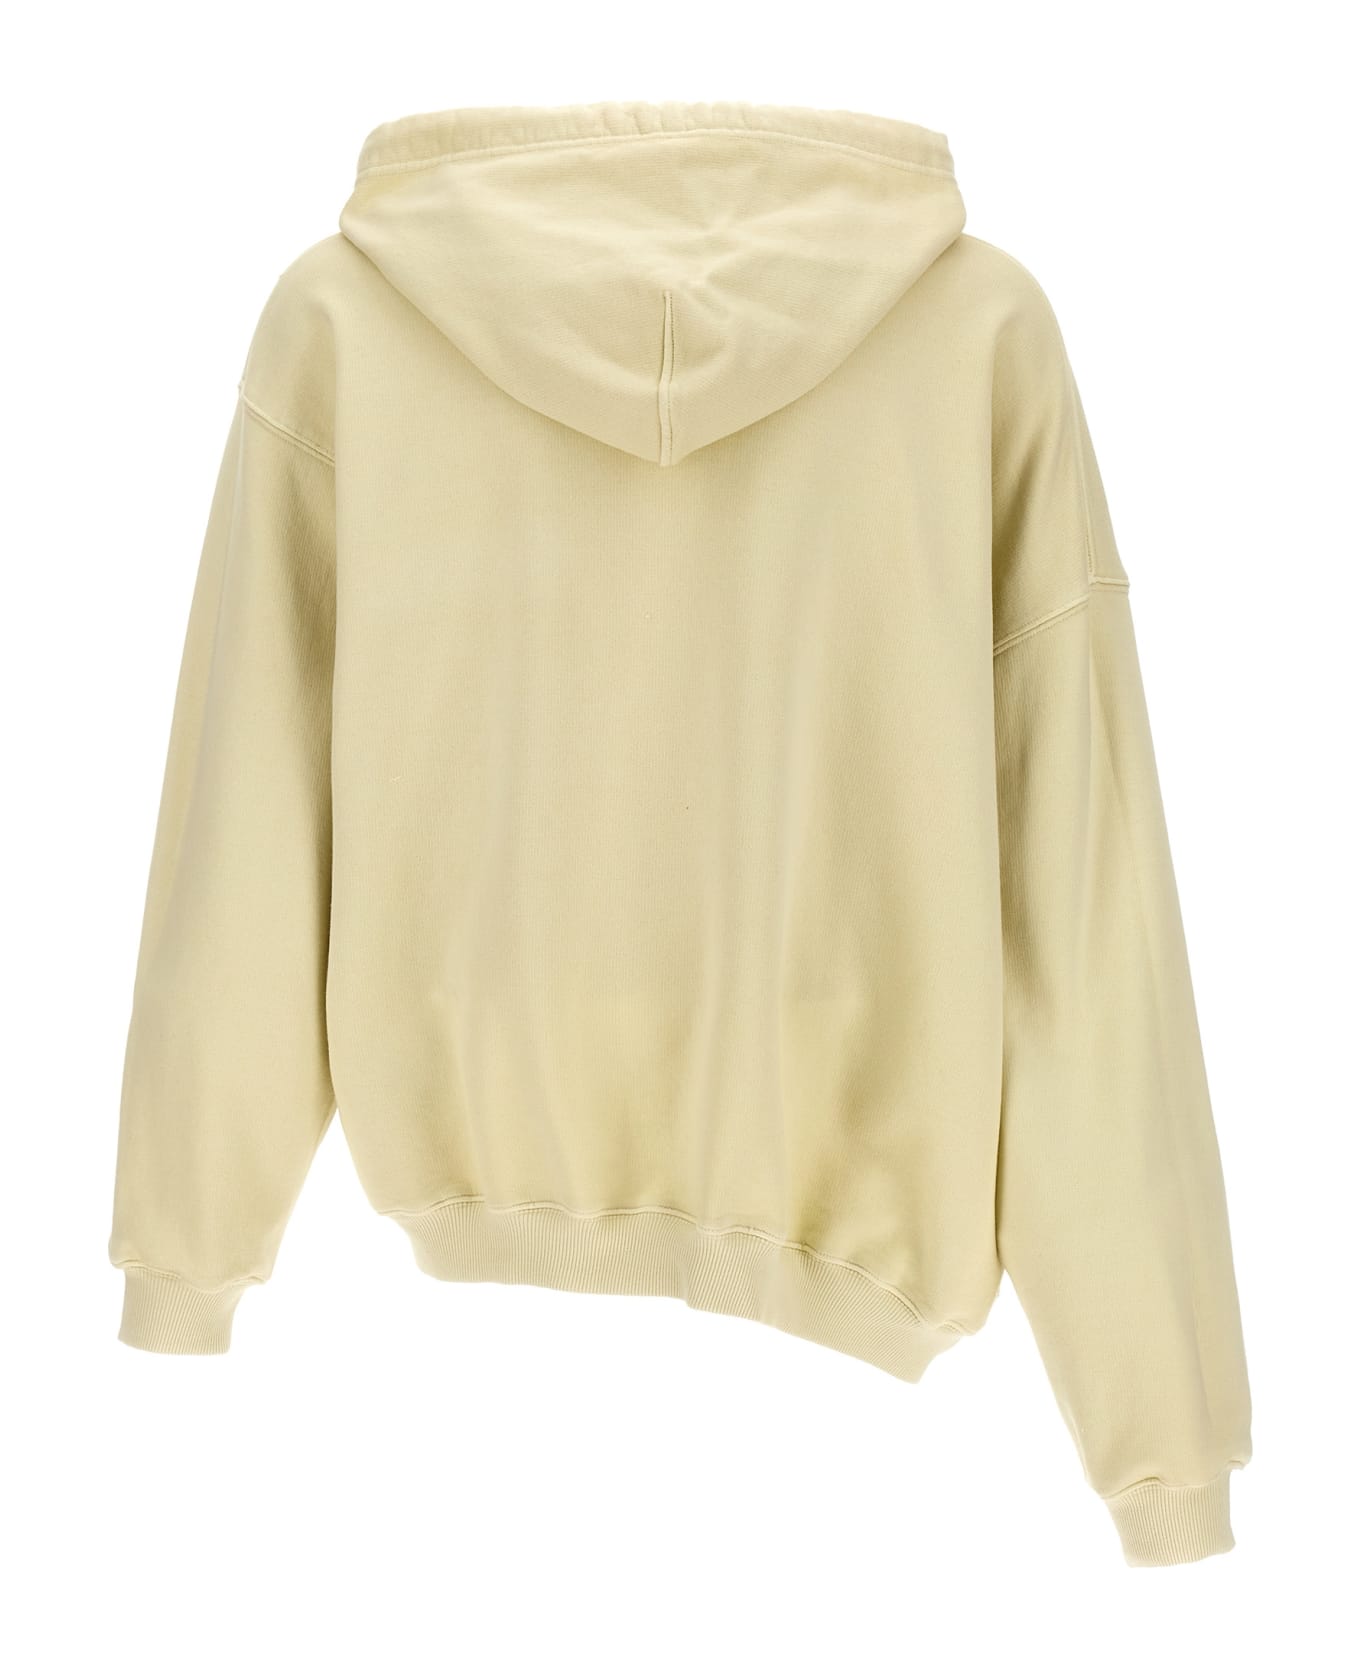 Magliano 'twisted' Hoodie - White